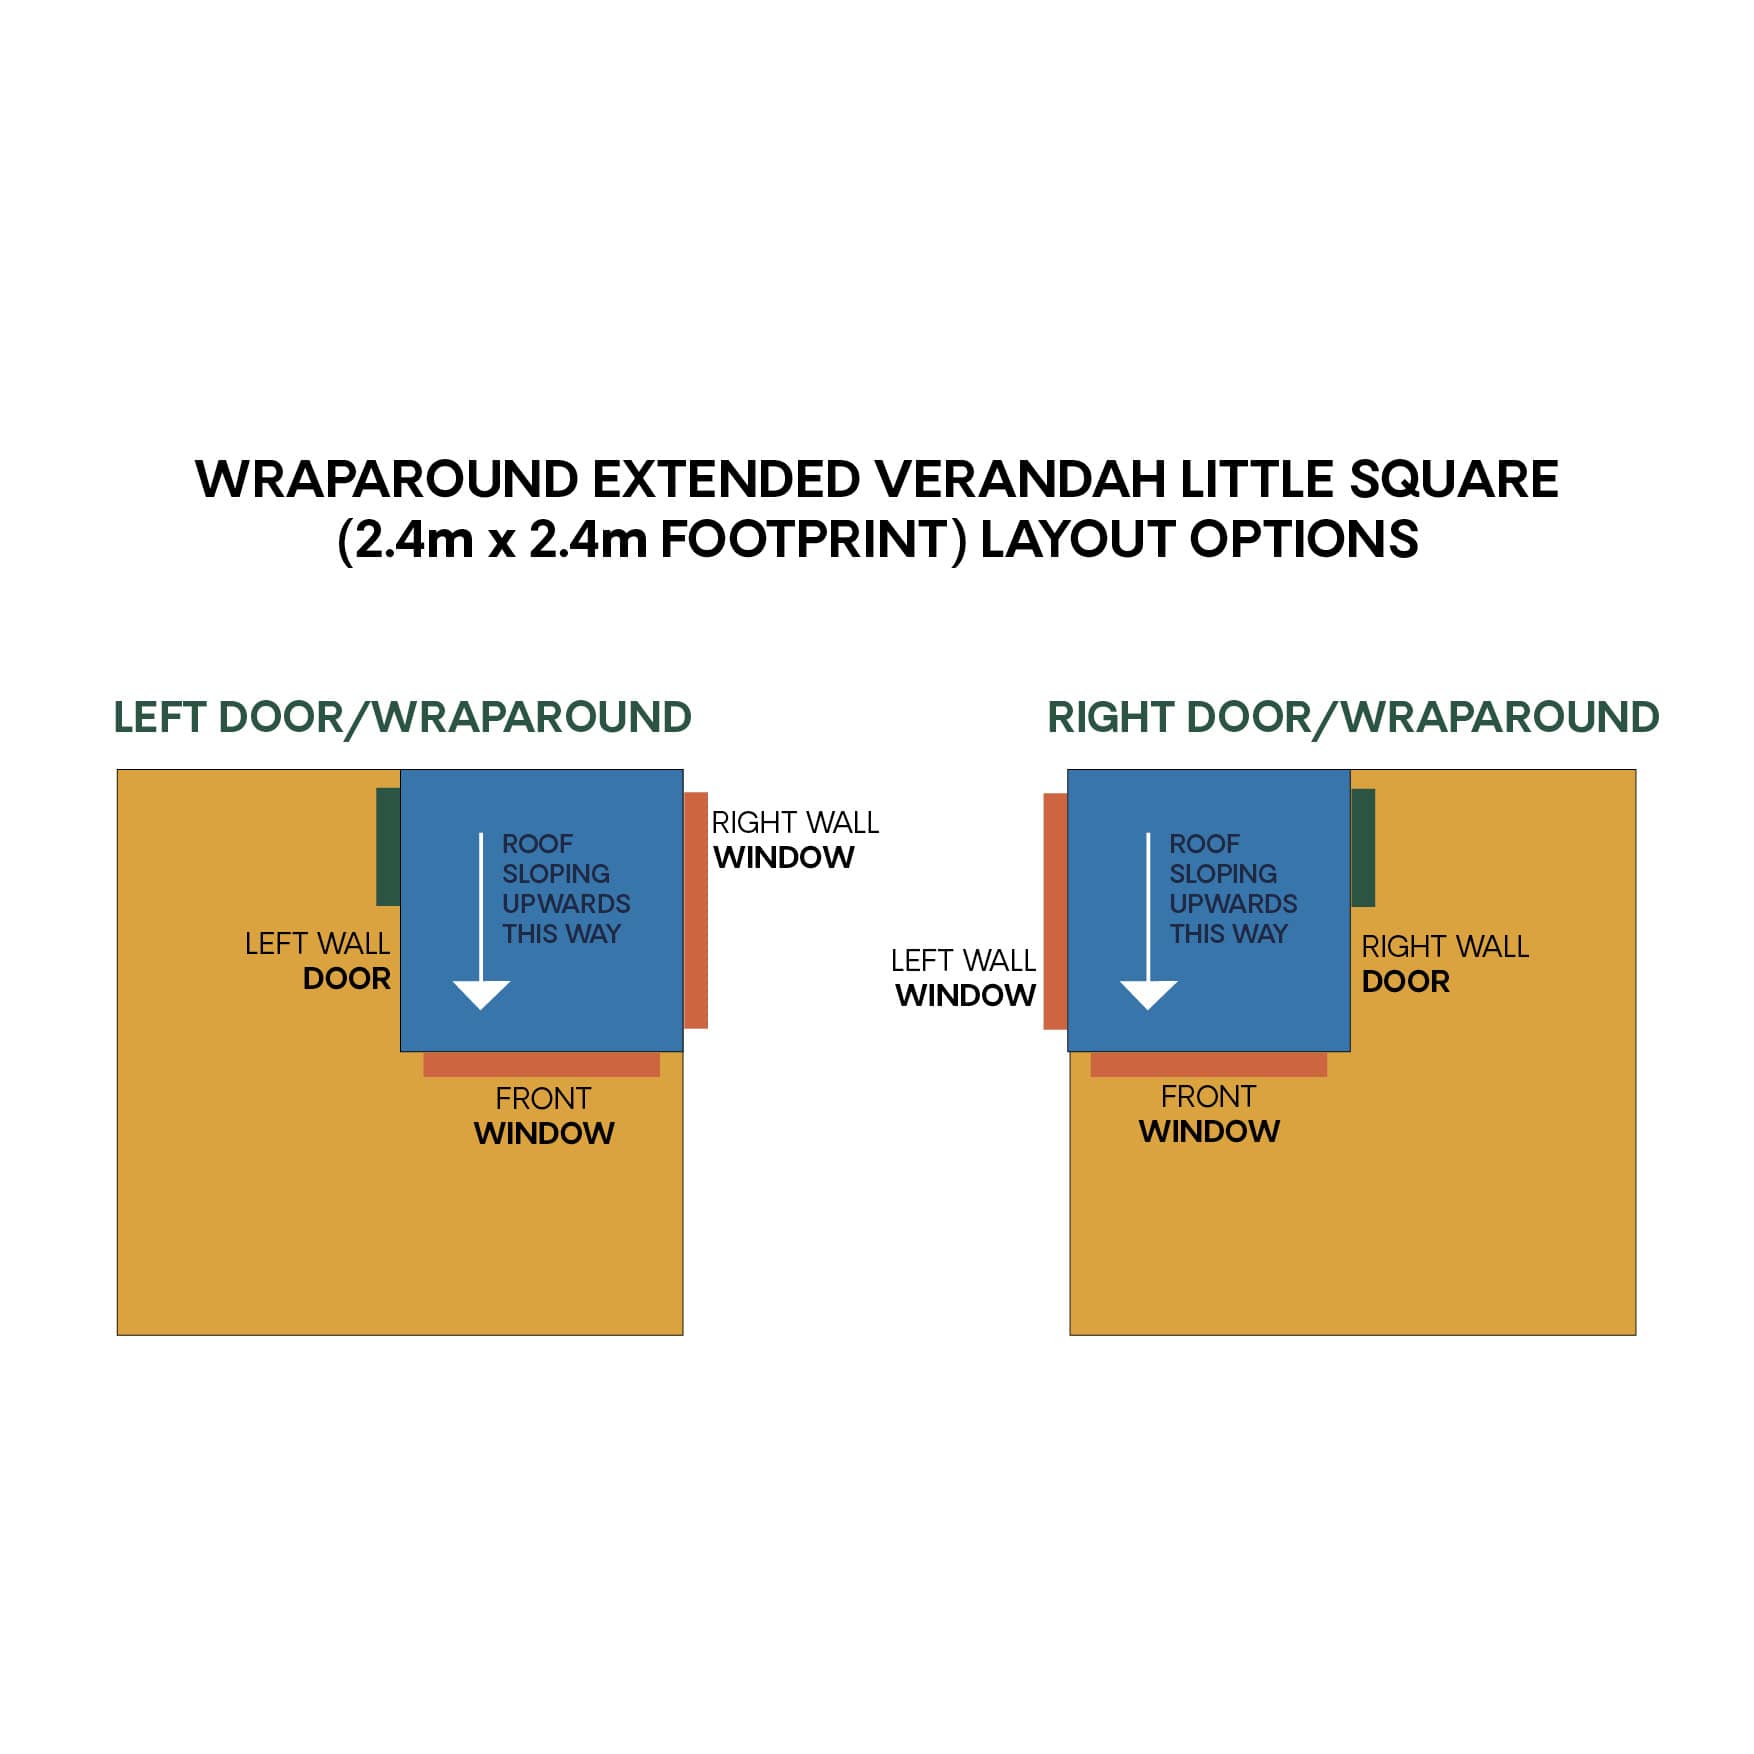 Layout options for extended height little square cubby with wraparound verandah